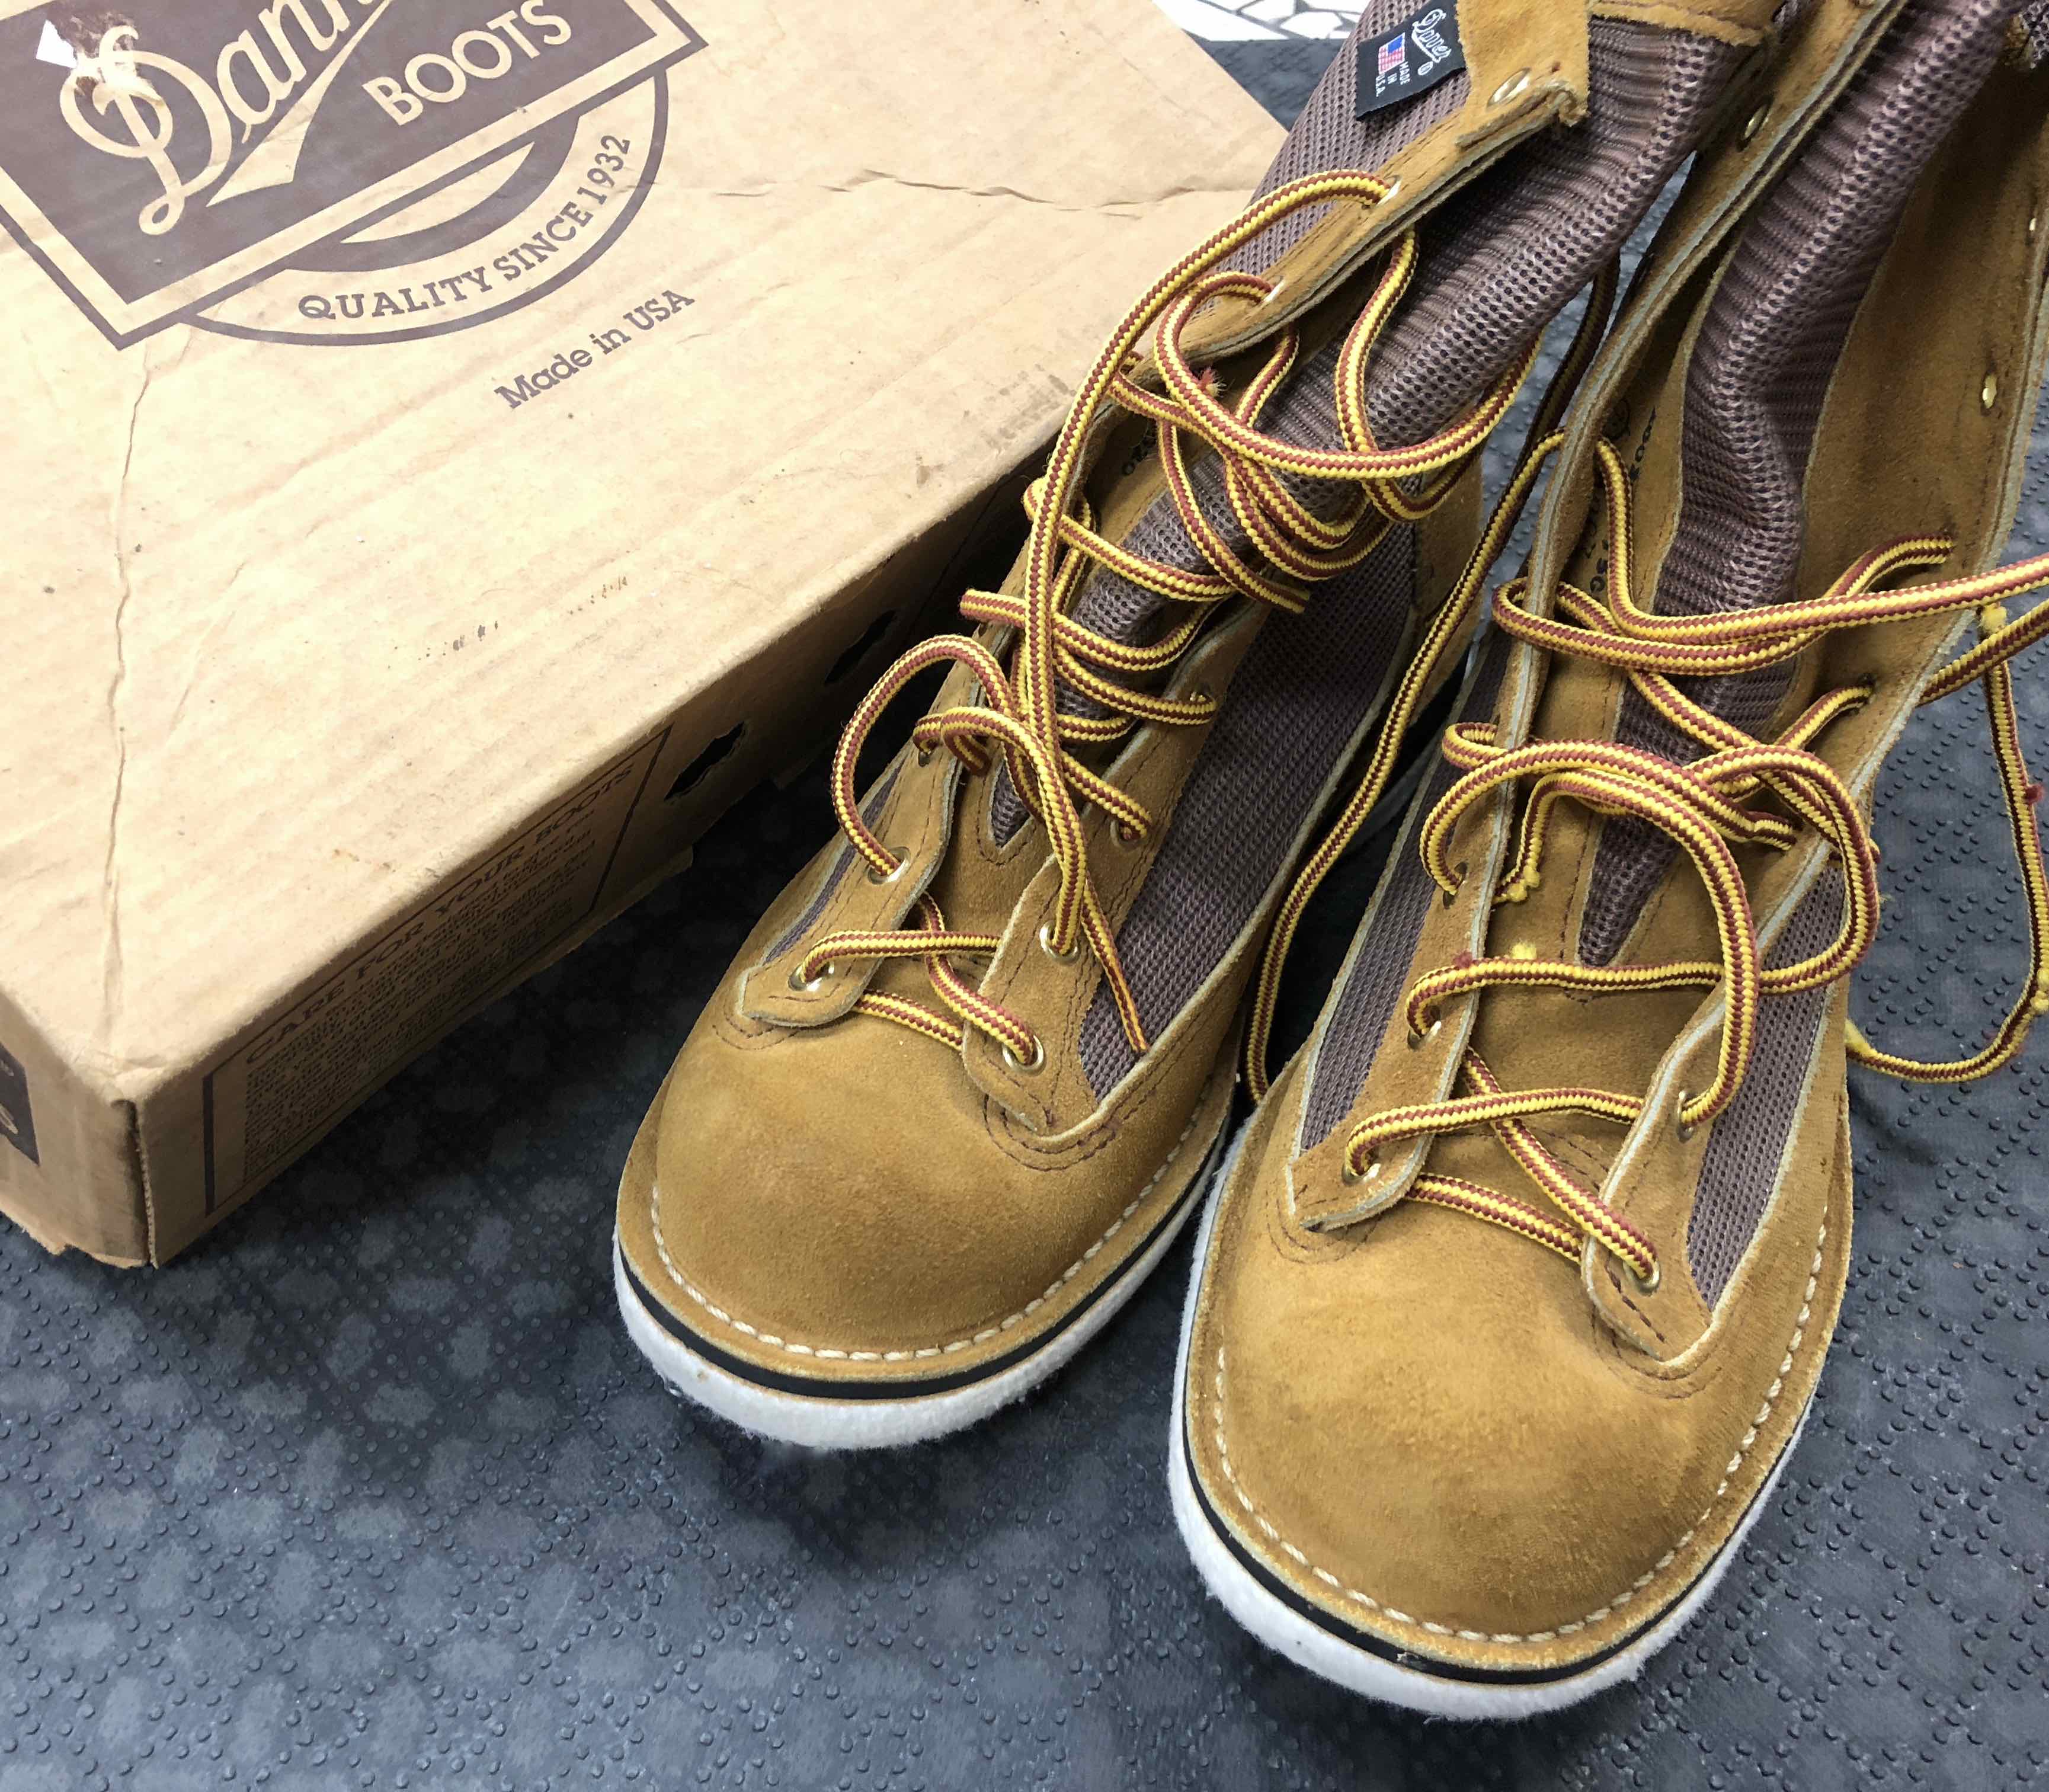 SOLD! – Danner Wading Boots – Size 9 – Felt Sole – NEVER USED